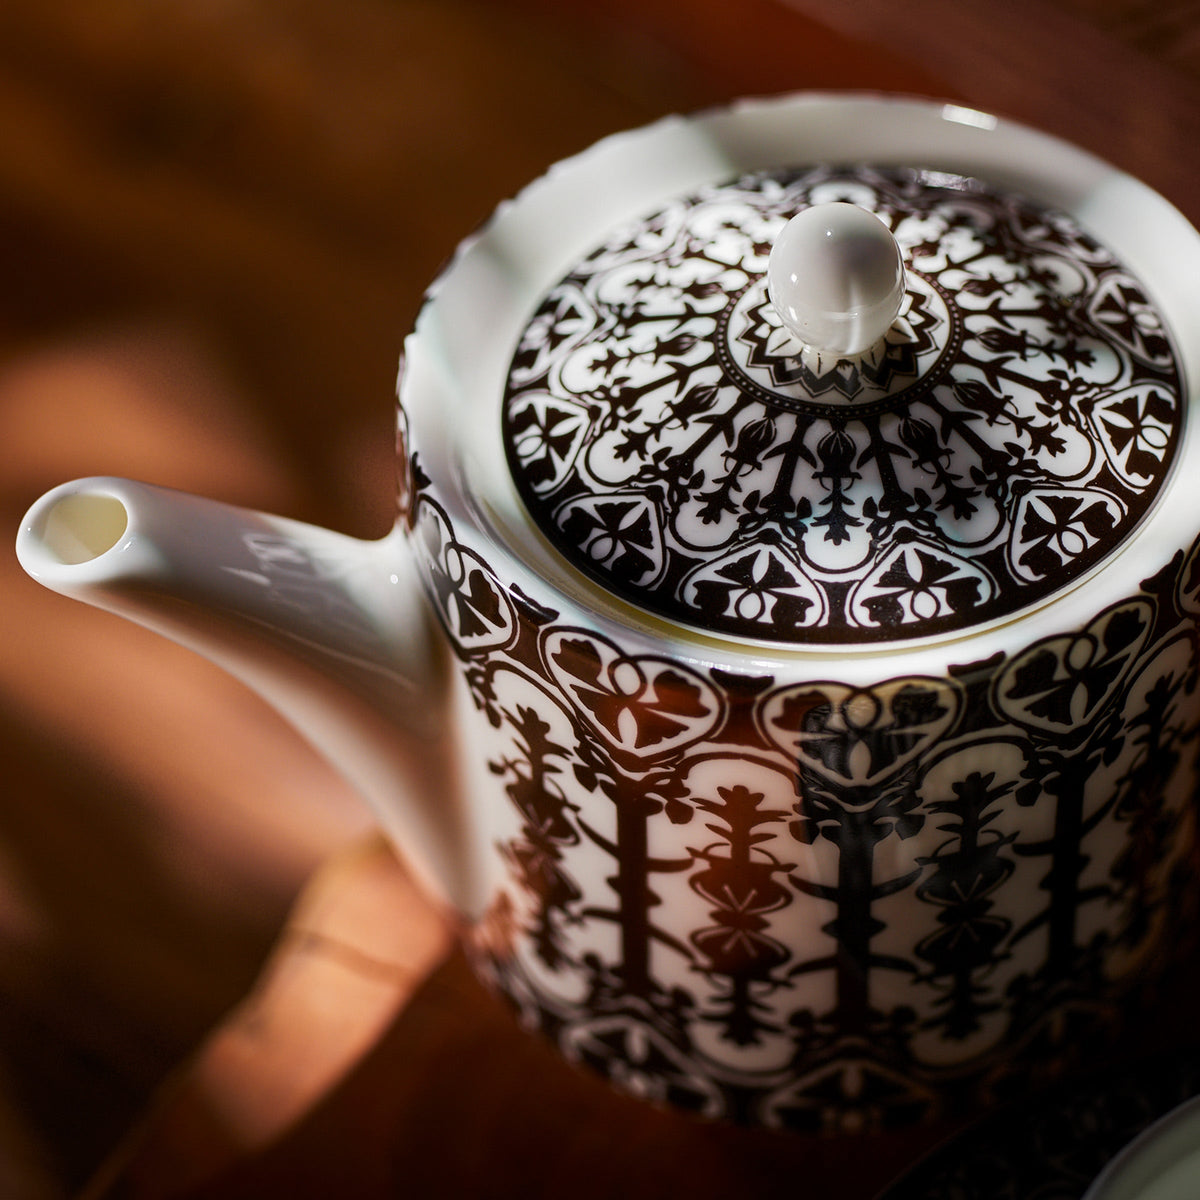 A Caskata Casablanca Petite Teapot, inspired by the classic film Casablanca, elegantly rests on a wooden table.